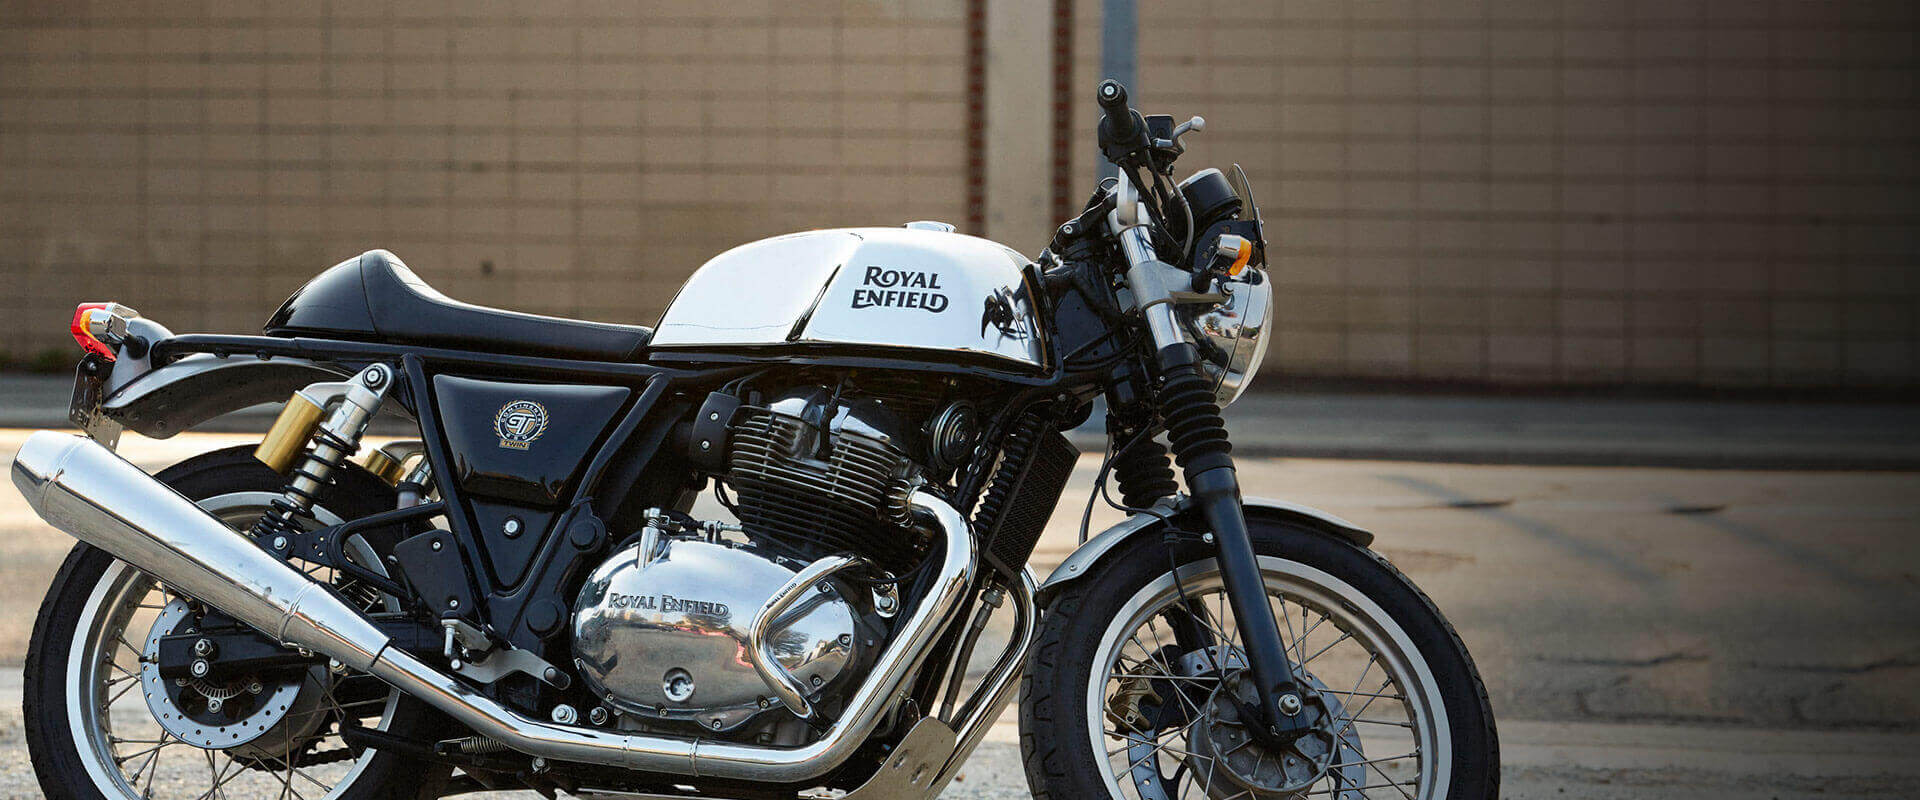 Royal Enfield 650 Twins to be available 40 official accessories in India